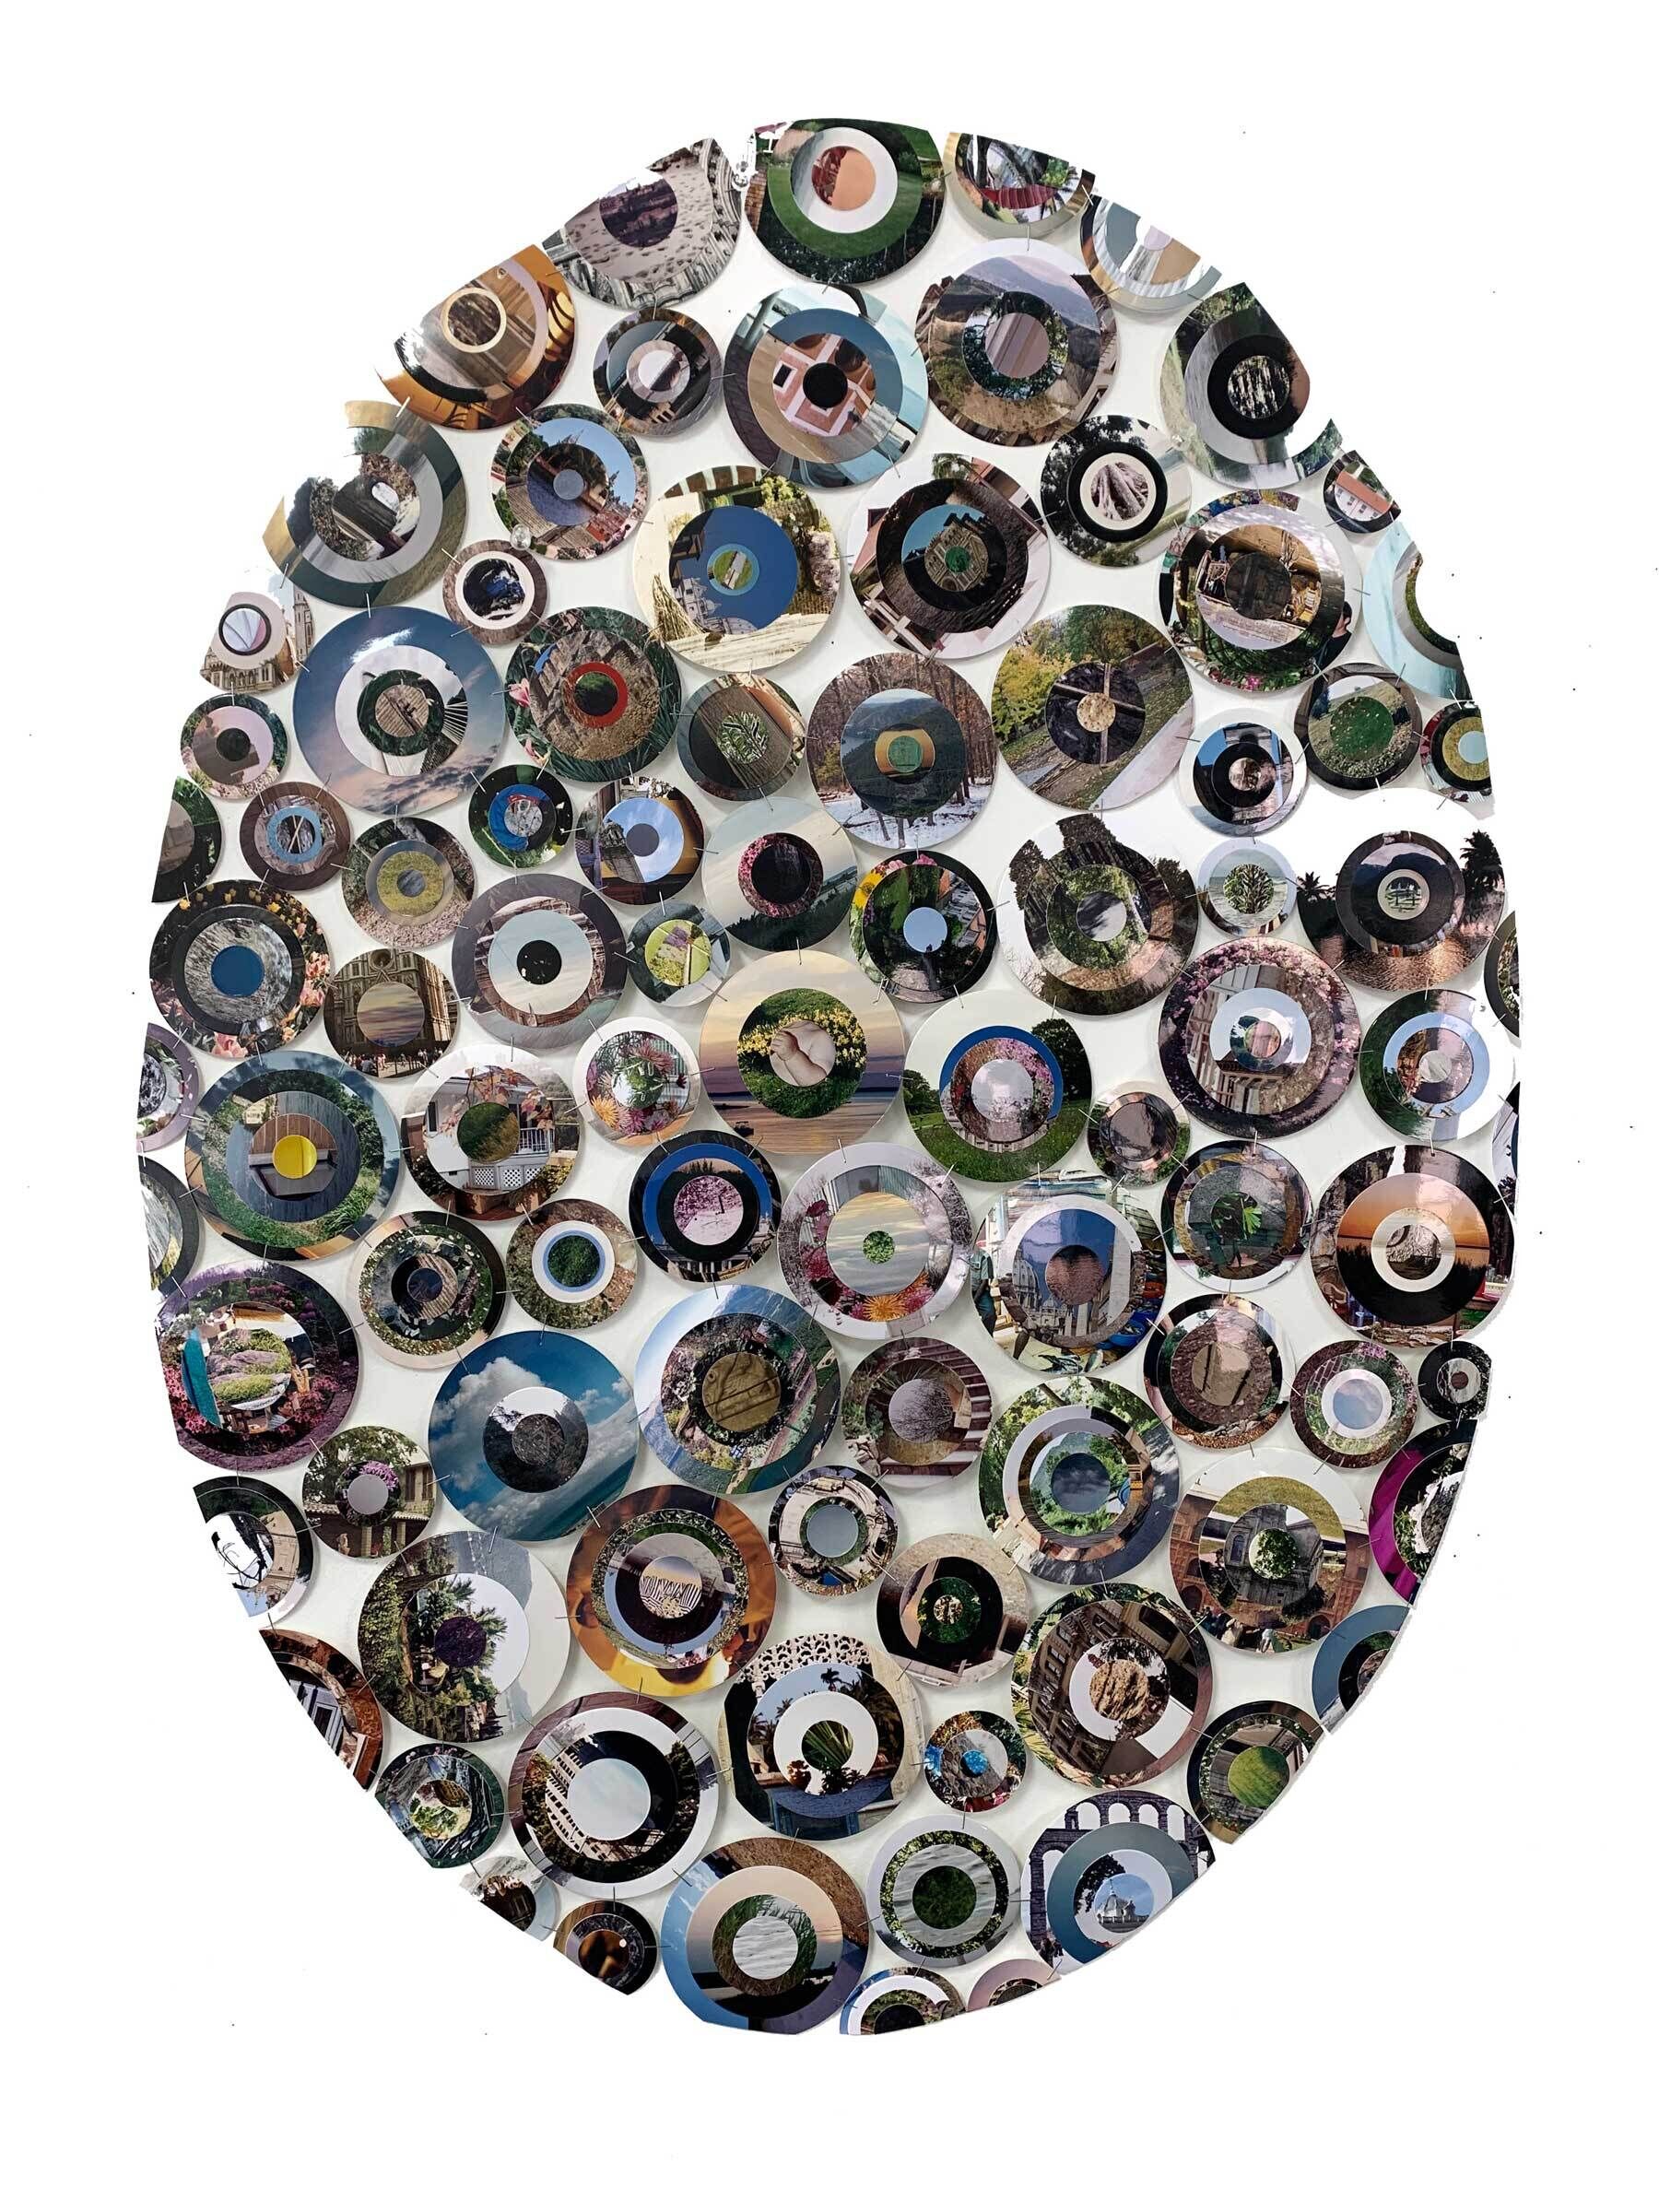 An oval shaped image of multiple circular mirrors clustered together.